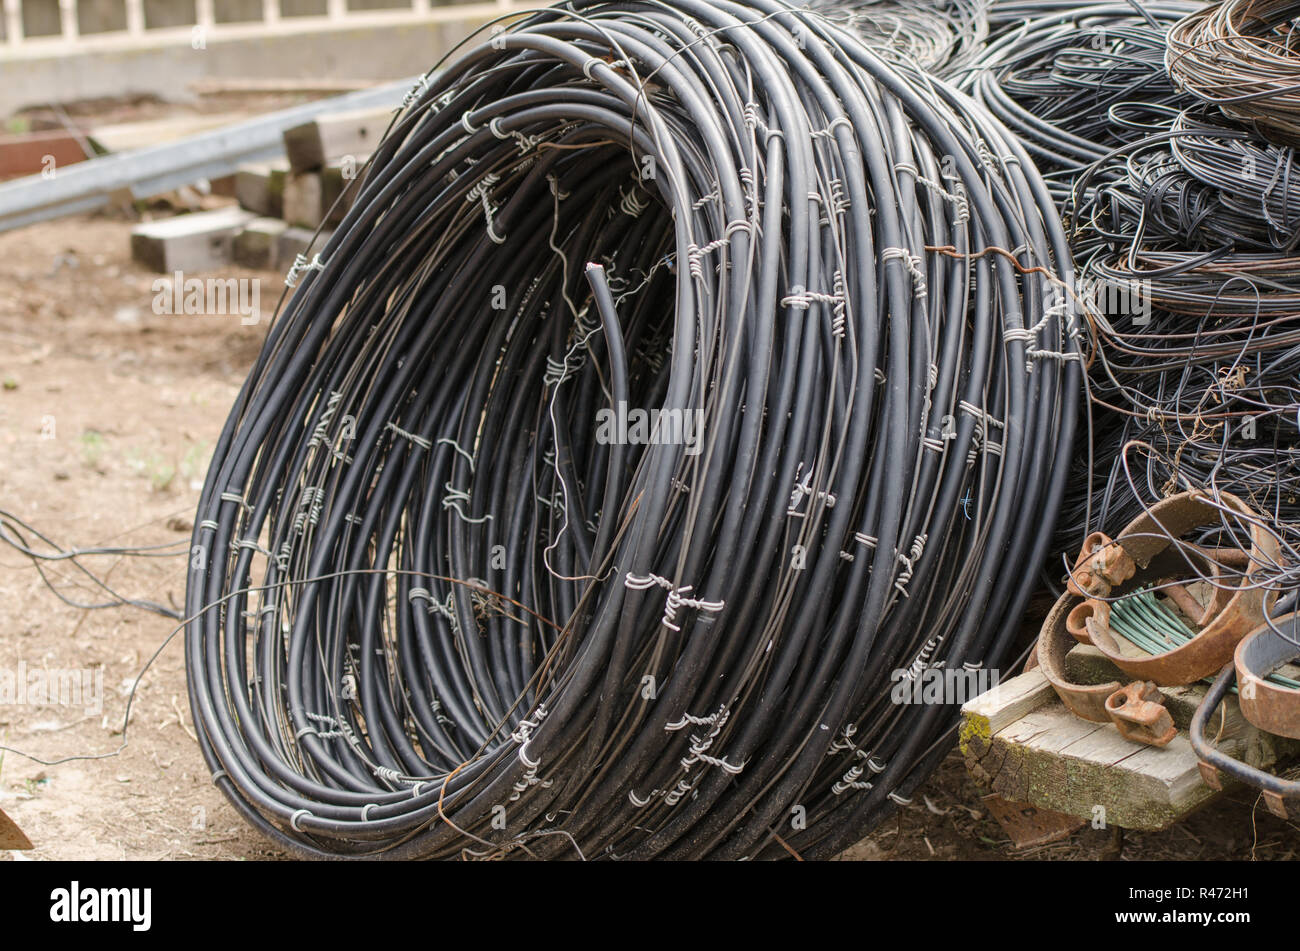 Pile of old wires lying on the ground Stock Photo